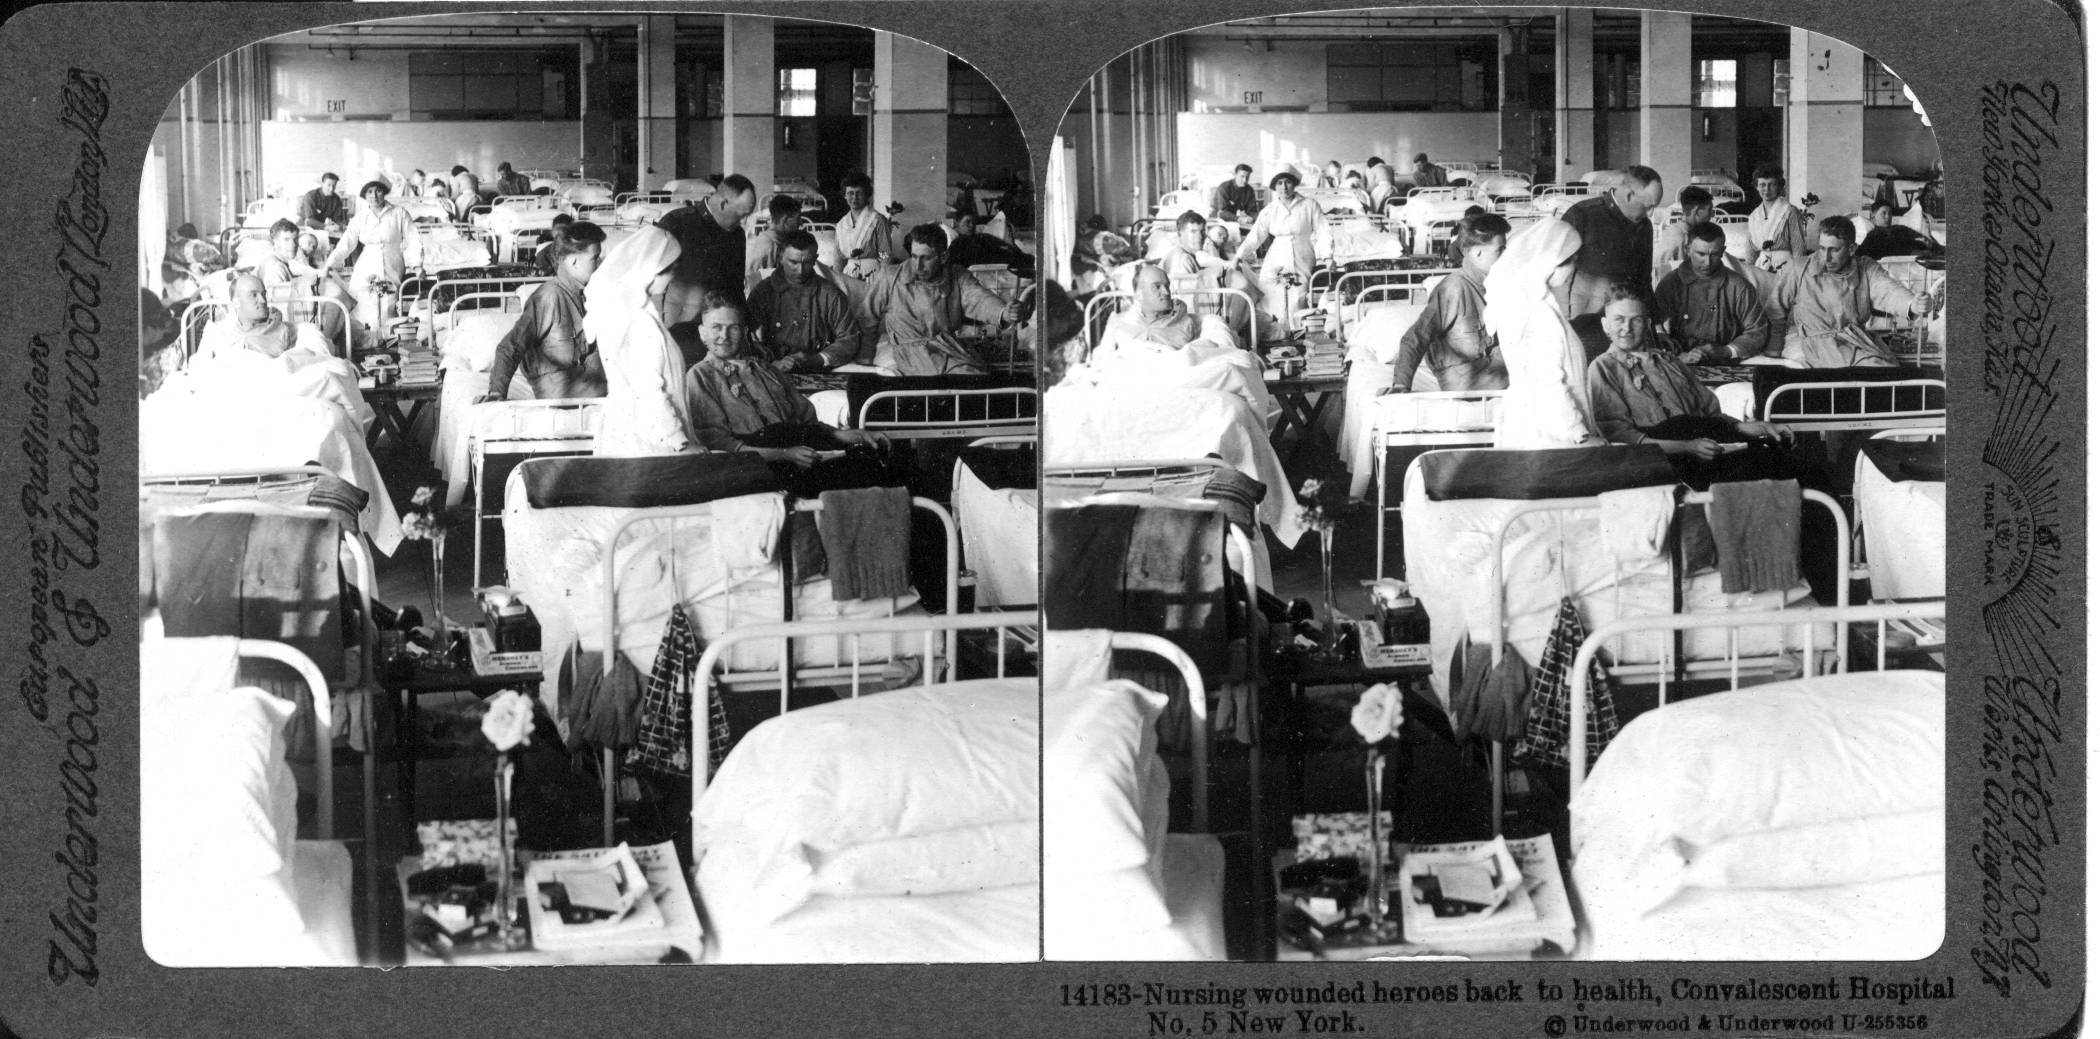 Nursing wounded heroes back to health, Convalescent Hospital No. 5